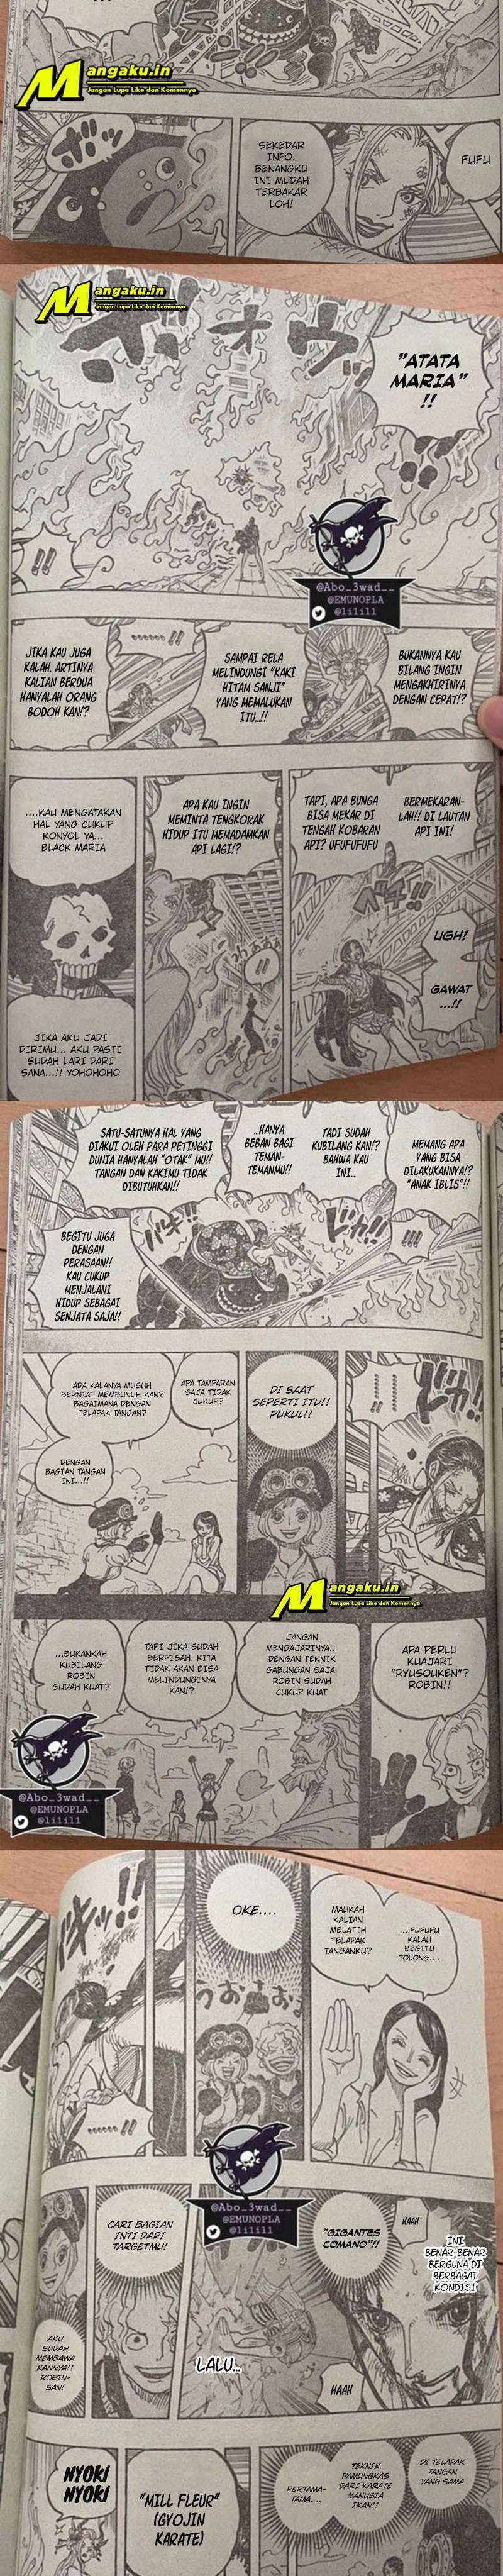 One Piece Chapter 1021 LQ Image 2